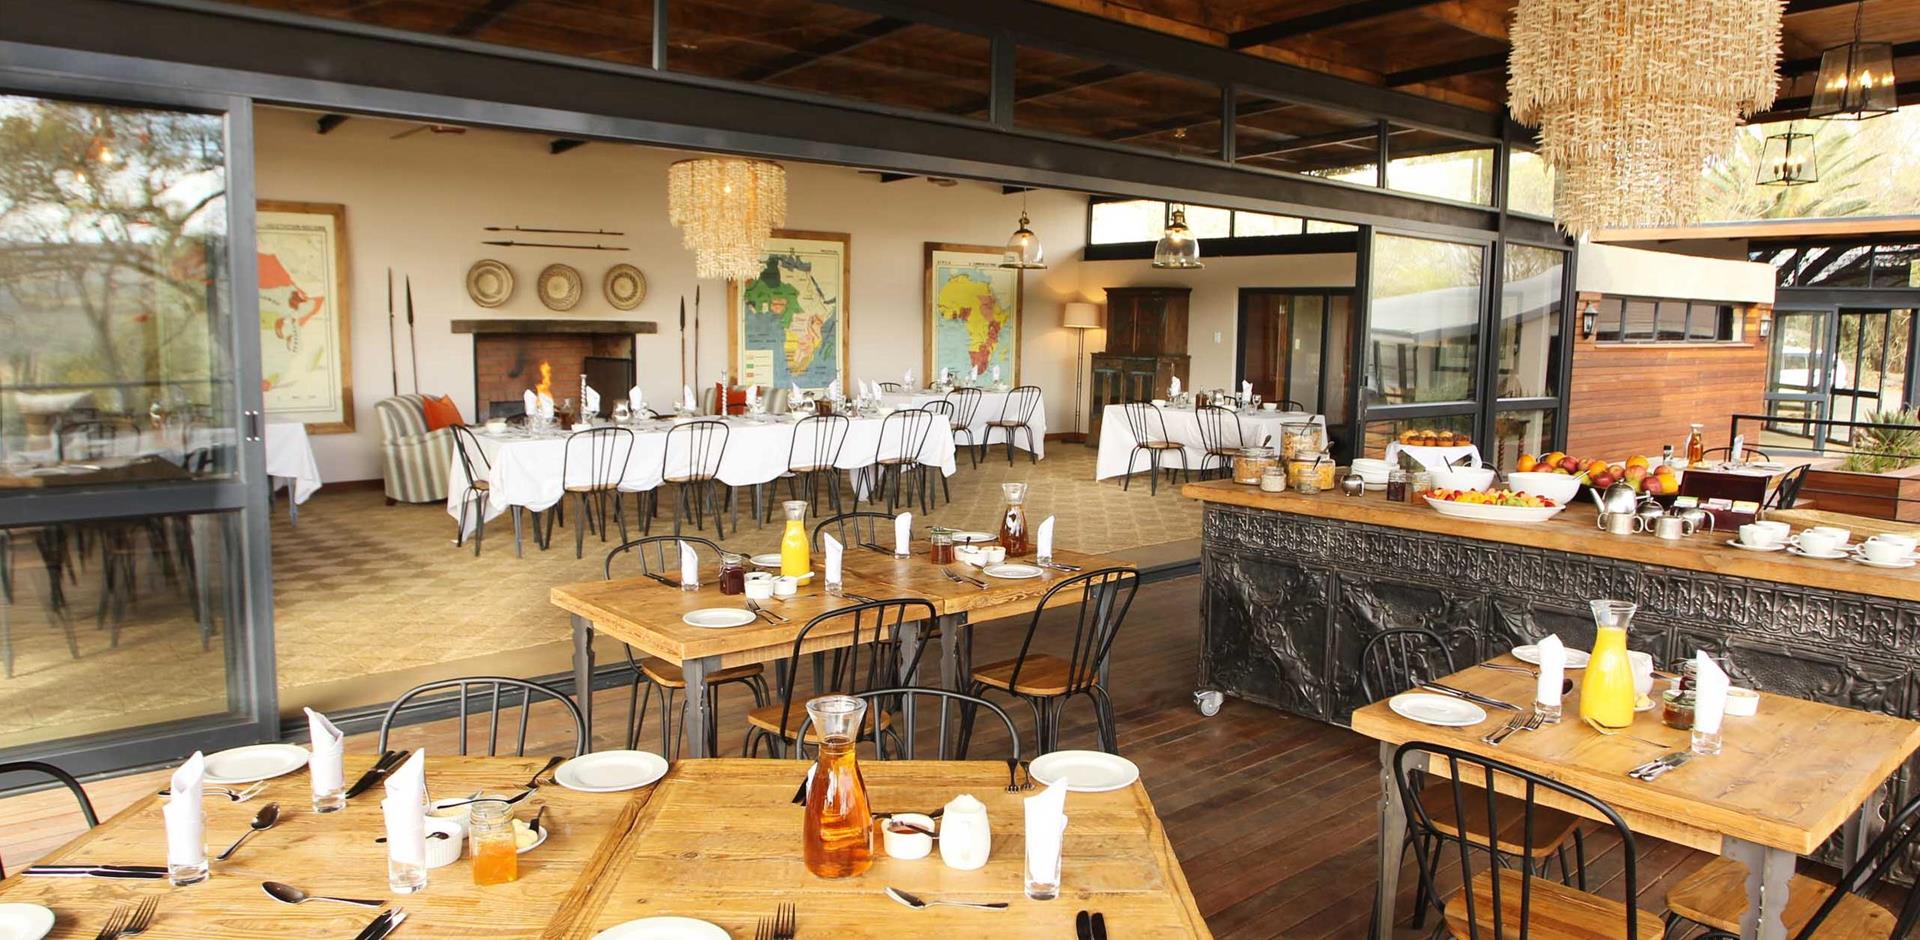 Dining room, Fugitives' Drift Lodge and Guesthouse, South Africa, A&K